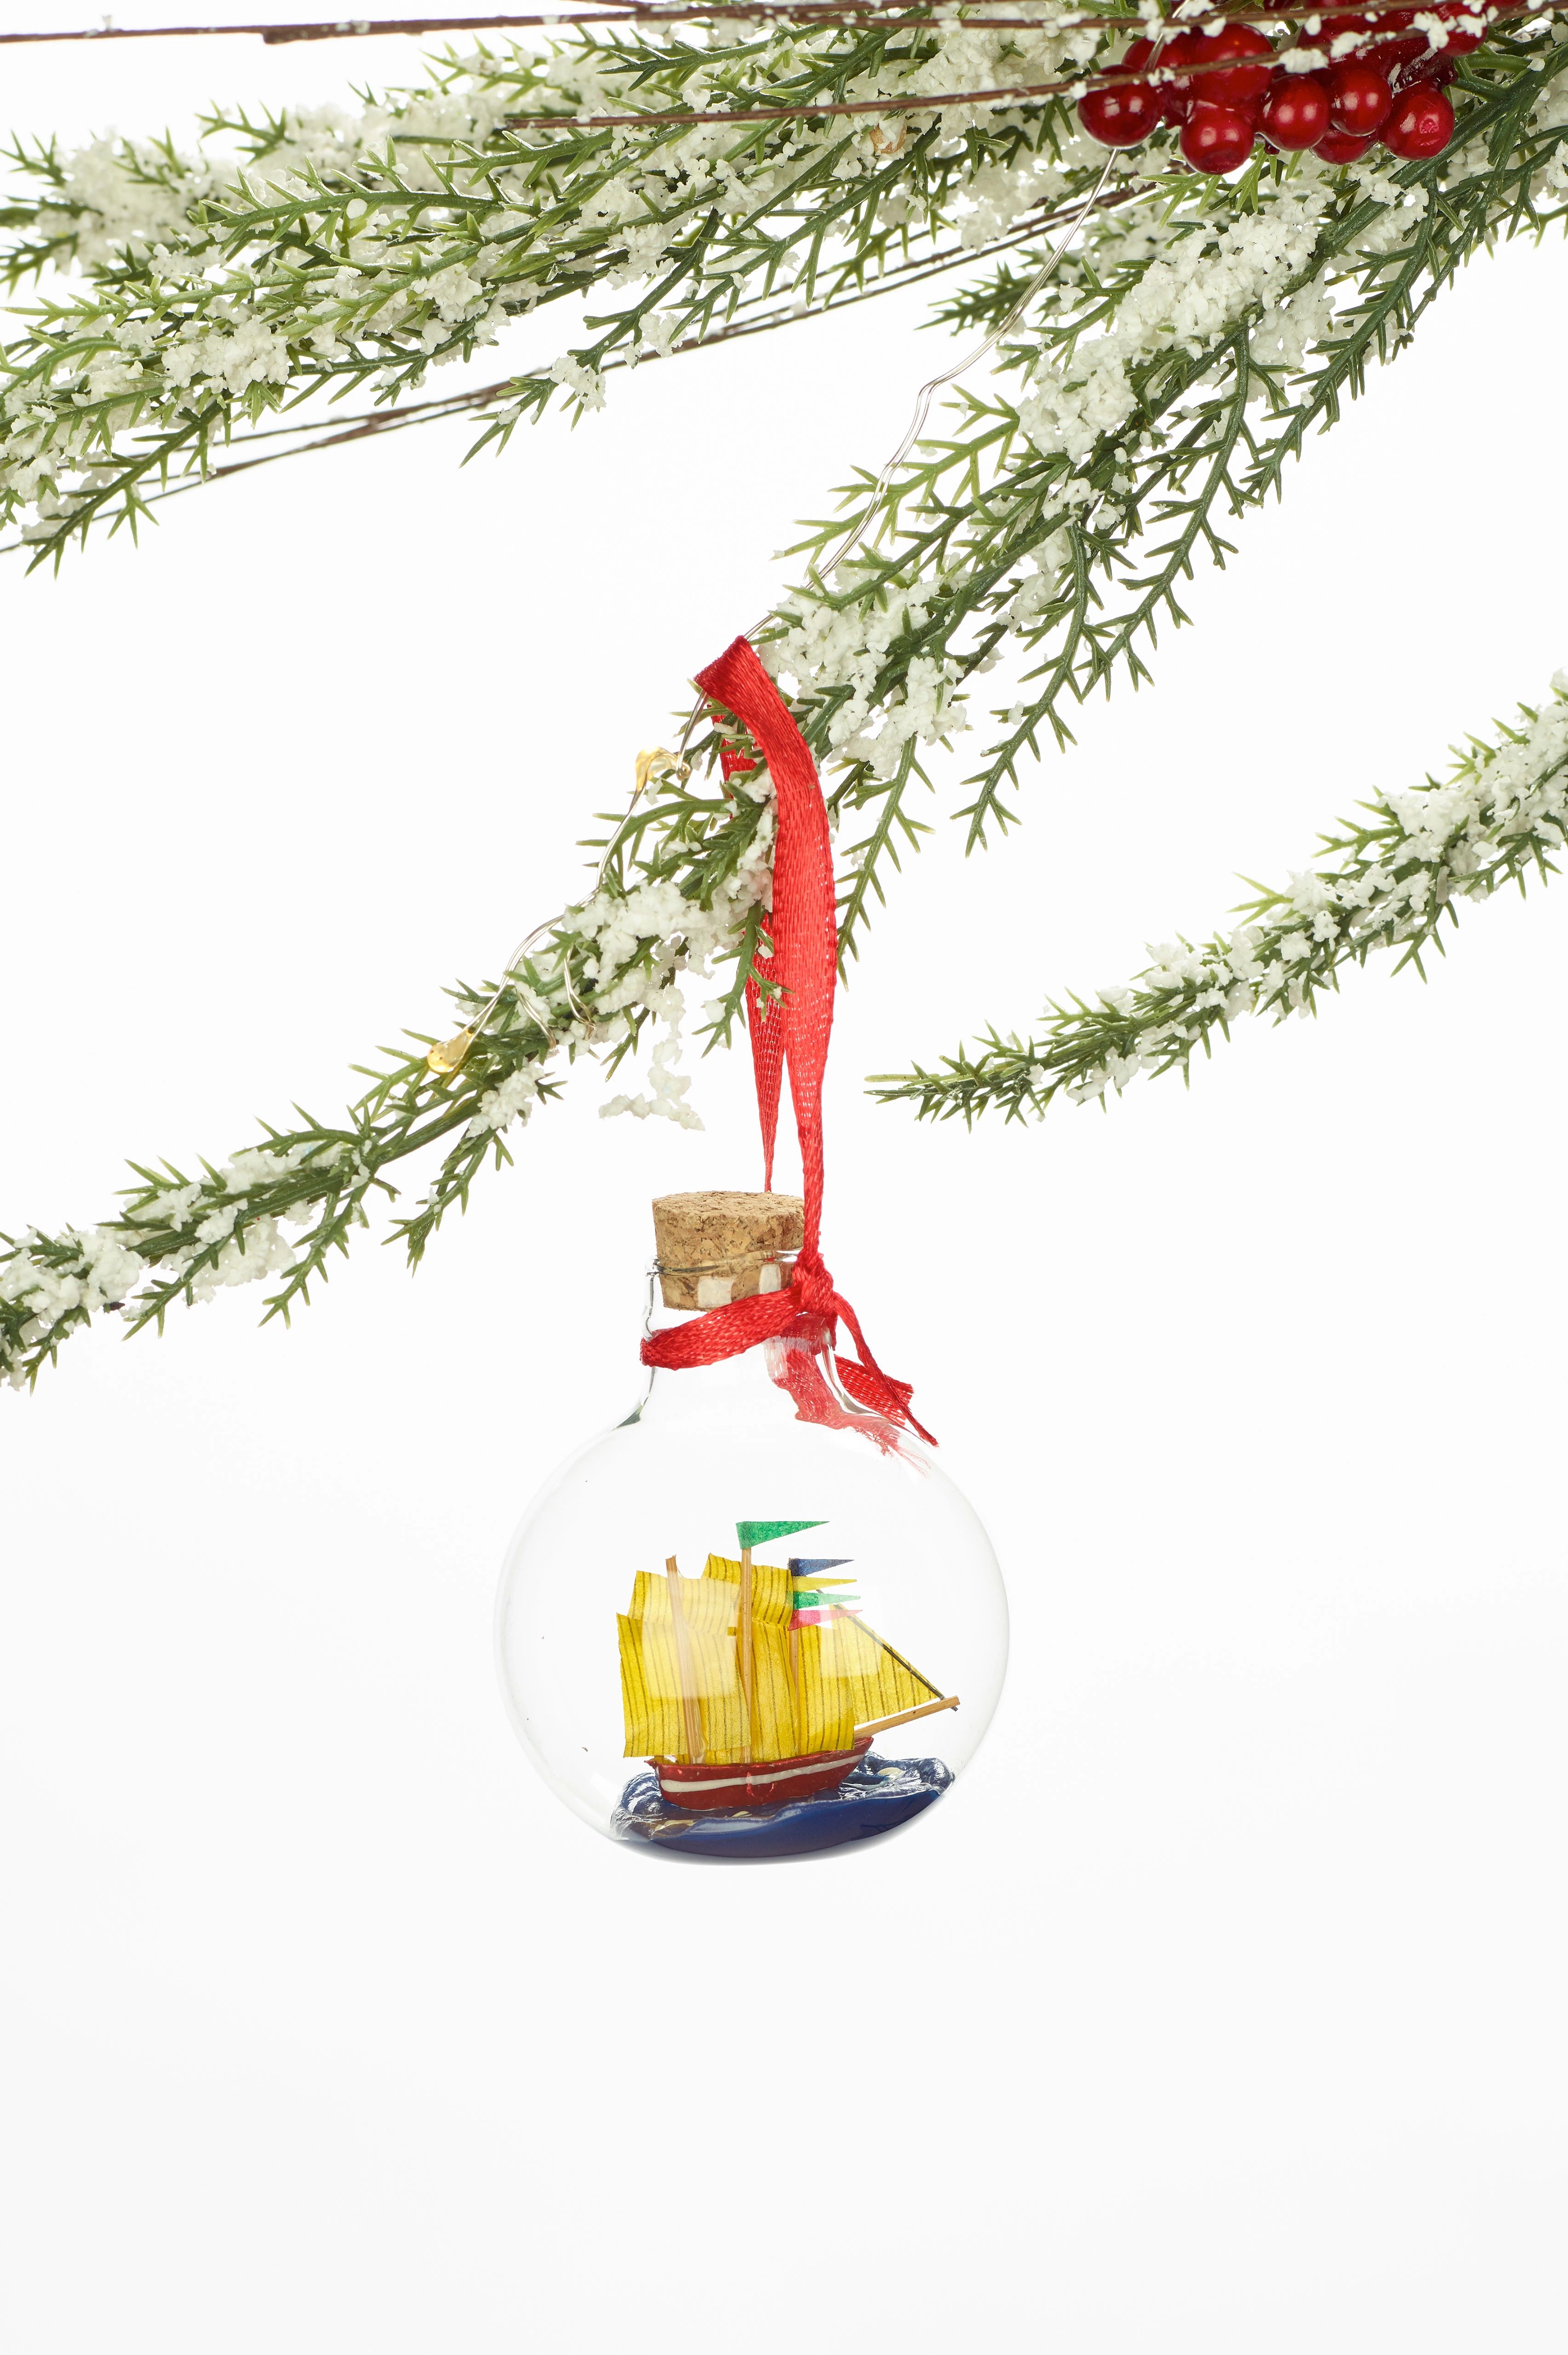 Ornament hanging from a Christmas tree